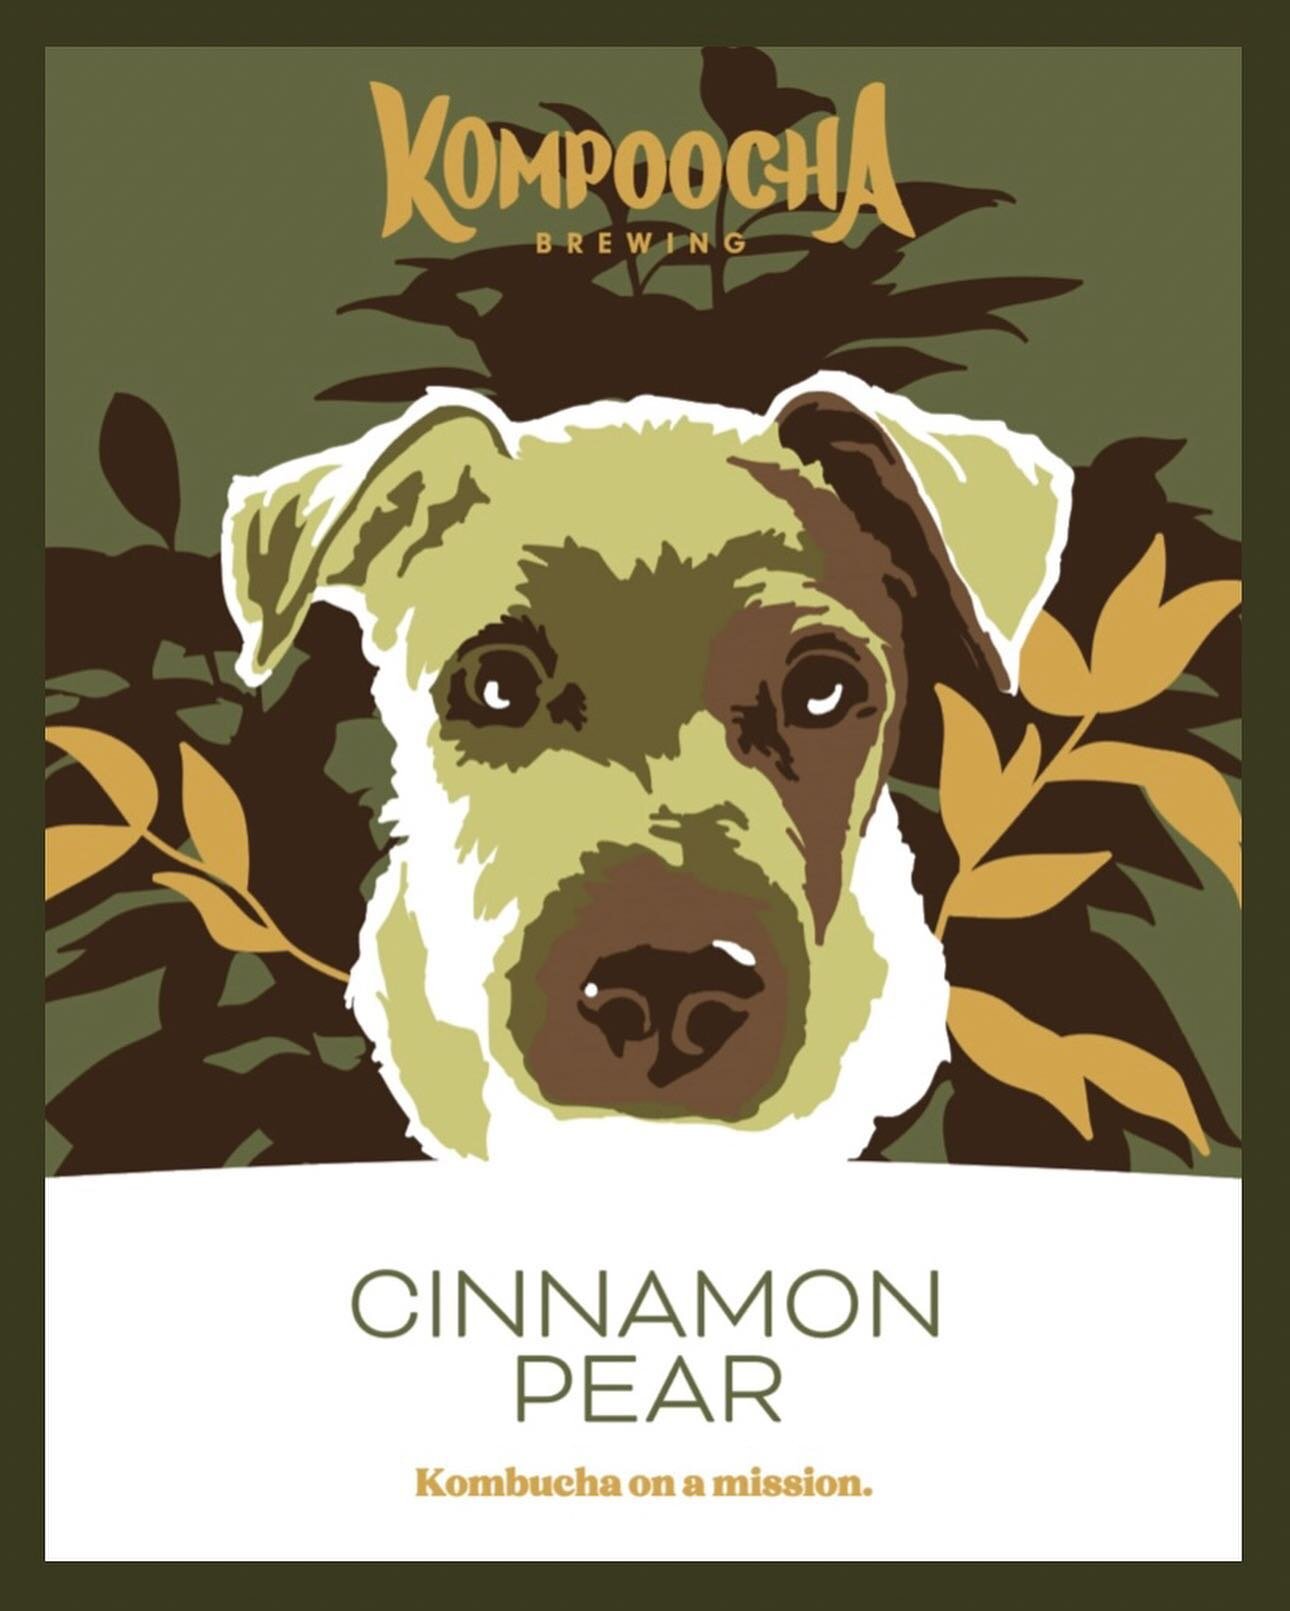 🍐 CINNAMON PEAR 🍐 

🍂 Soon to be available in cans for the season! 🍂

Meet our Cinnamon Pear Dog: 

Rescued by the wonderful folks at @hoperanchanimalsanctuary in 2016 from a high kill shelter, this old man found himself affectionately named Gran